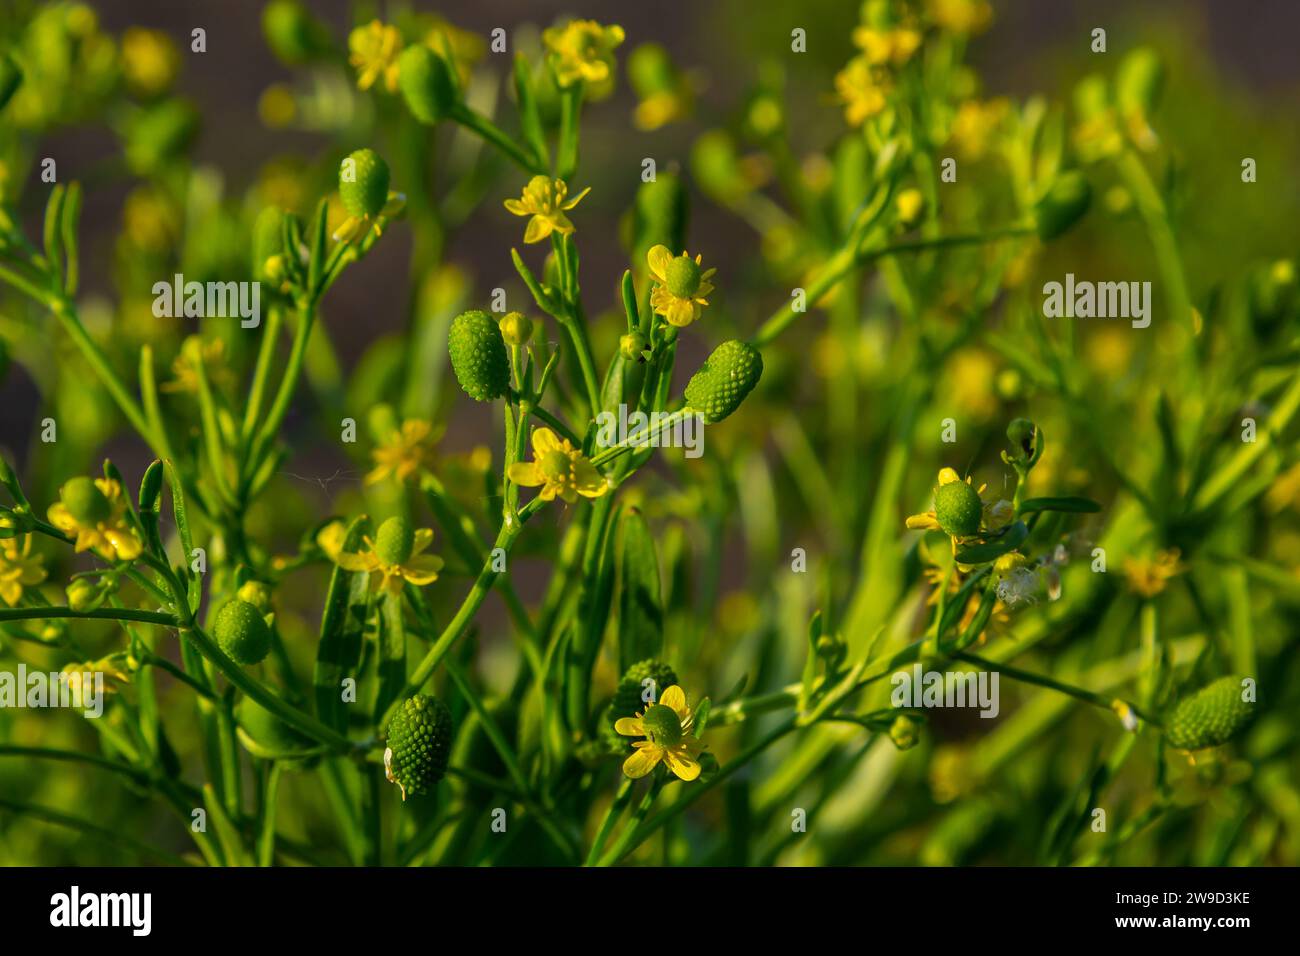 Ranunculus sceleratus, Celery-leaved buttercup, Ranunculaceae. Wild plant photographed in the spring. Stock Photo